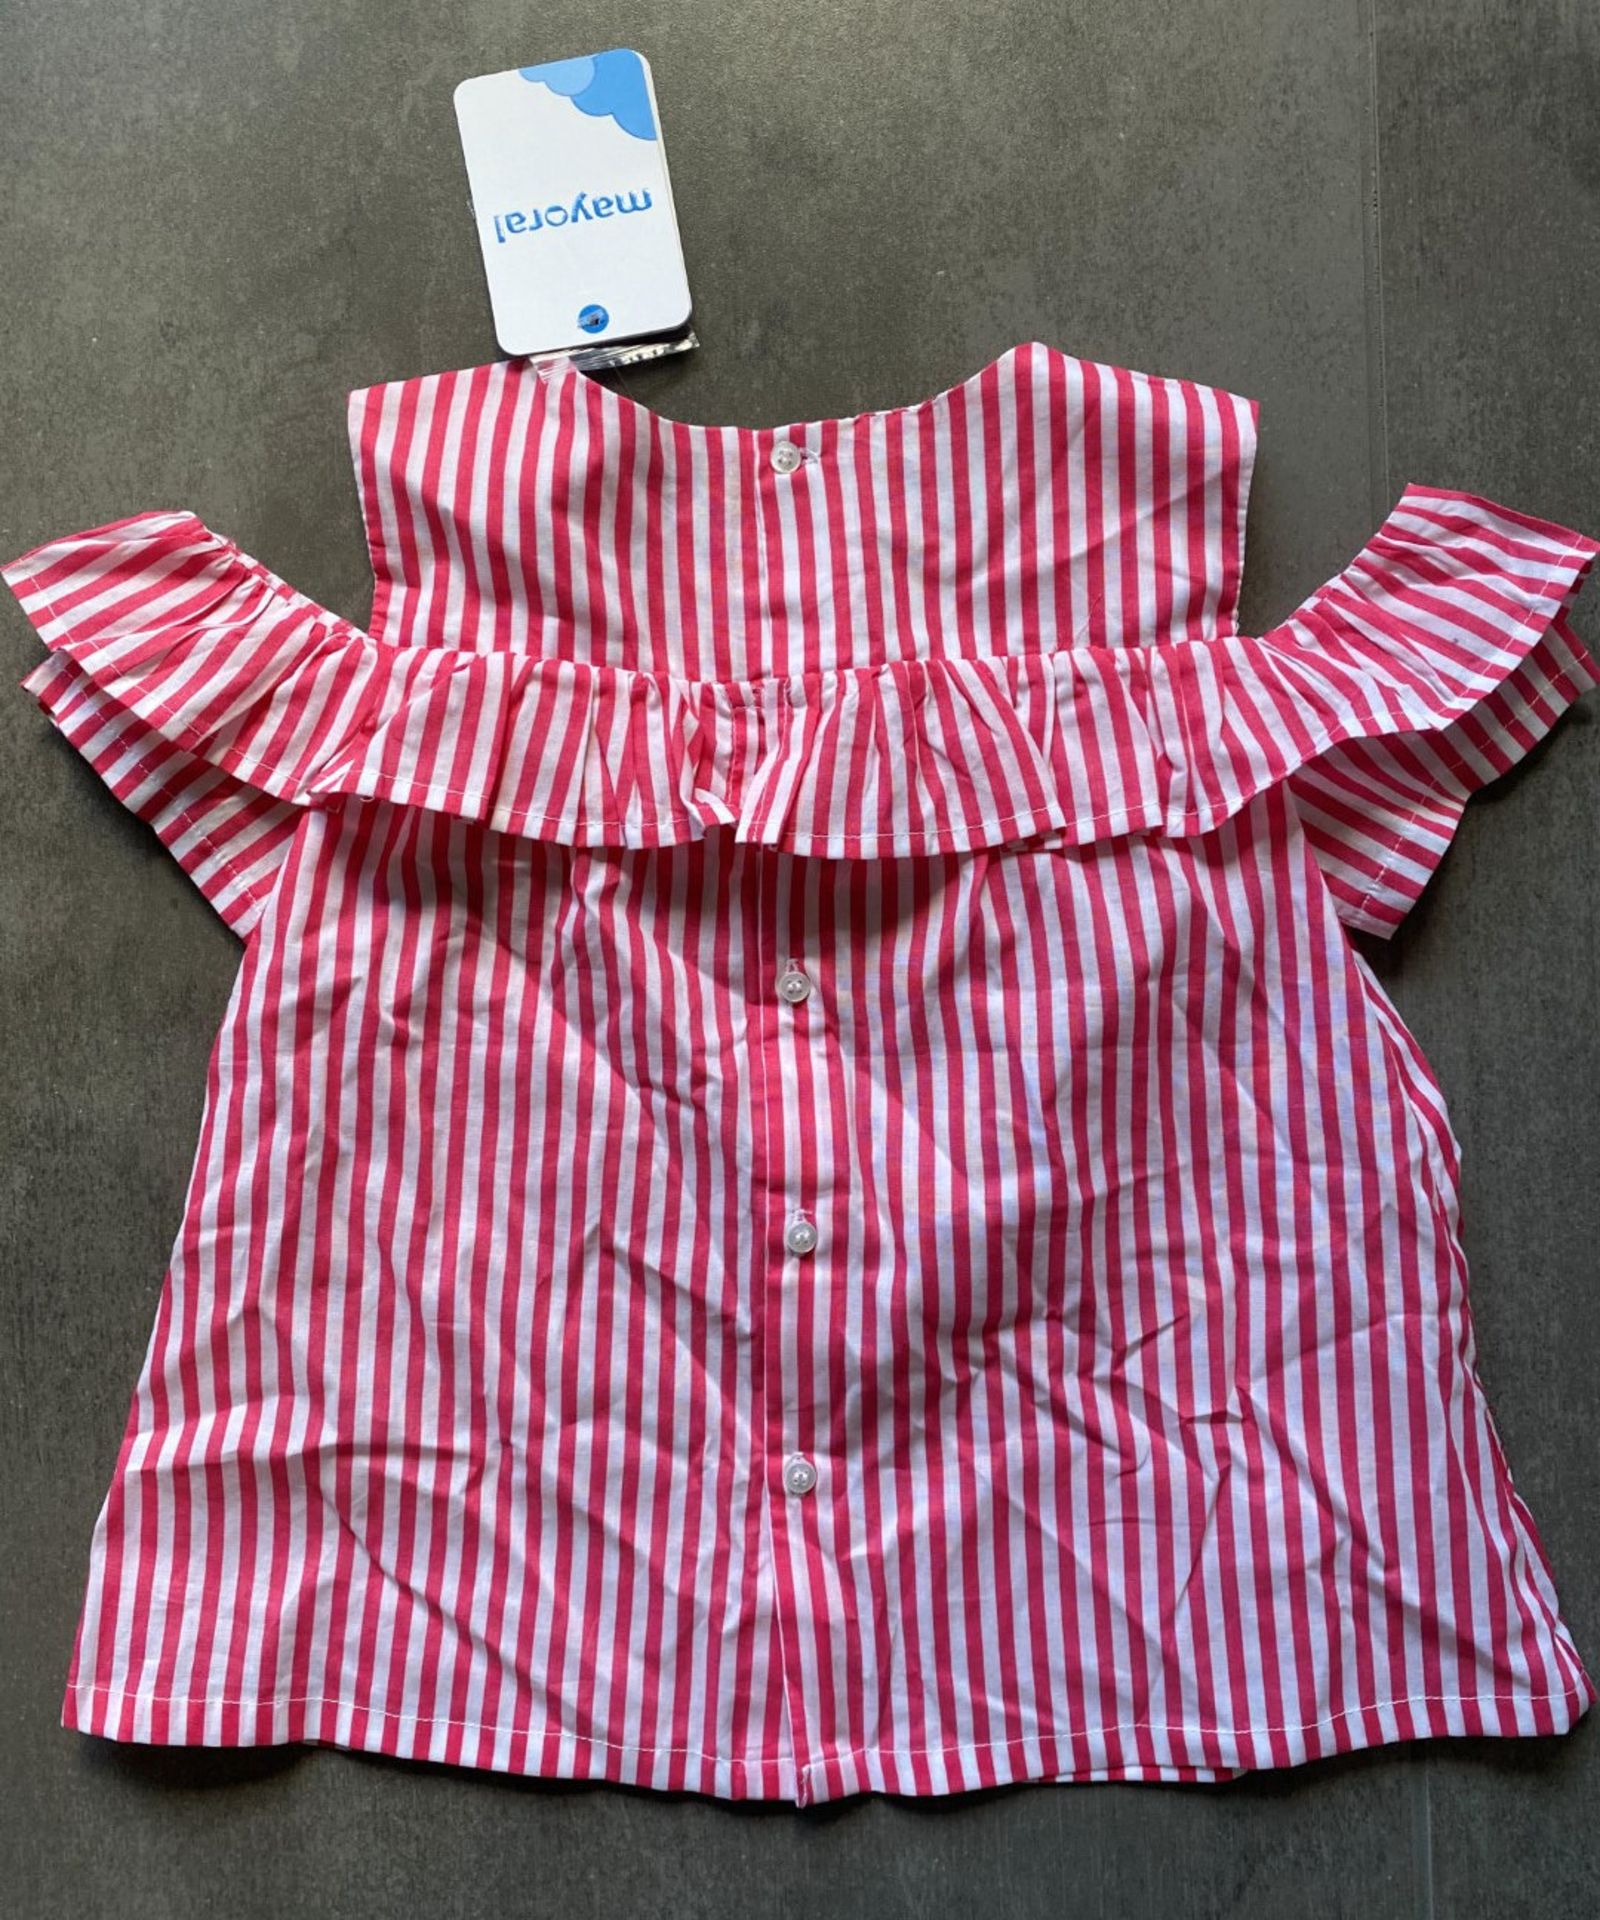 9 x Assorted Items Of Designer Children's Clothing - New With Tags - Suitable For Ages 5 And 6 Years - Image 36 of 47